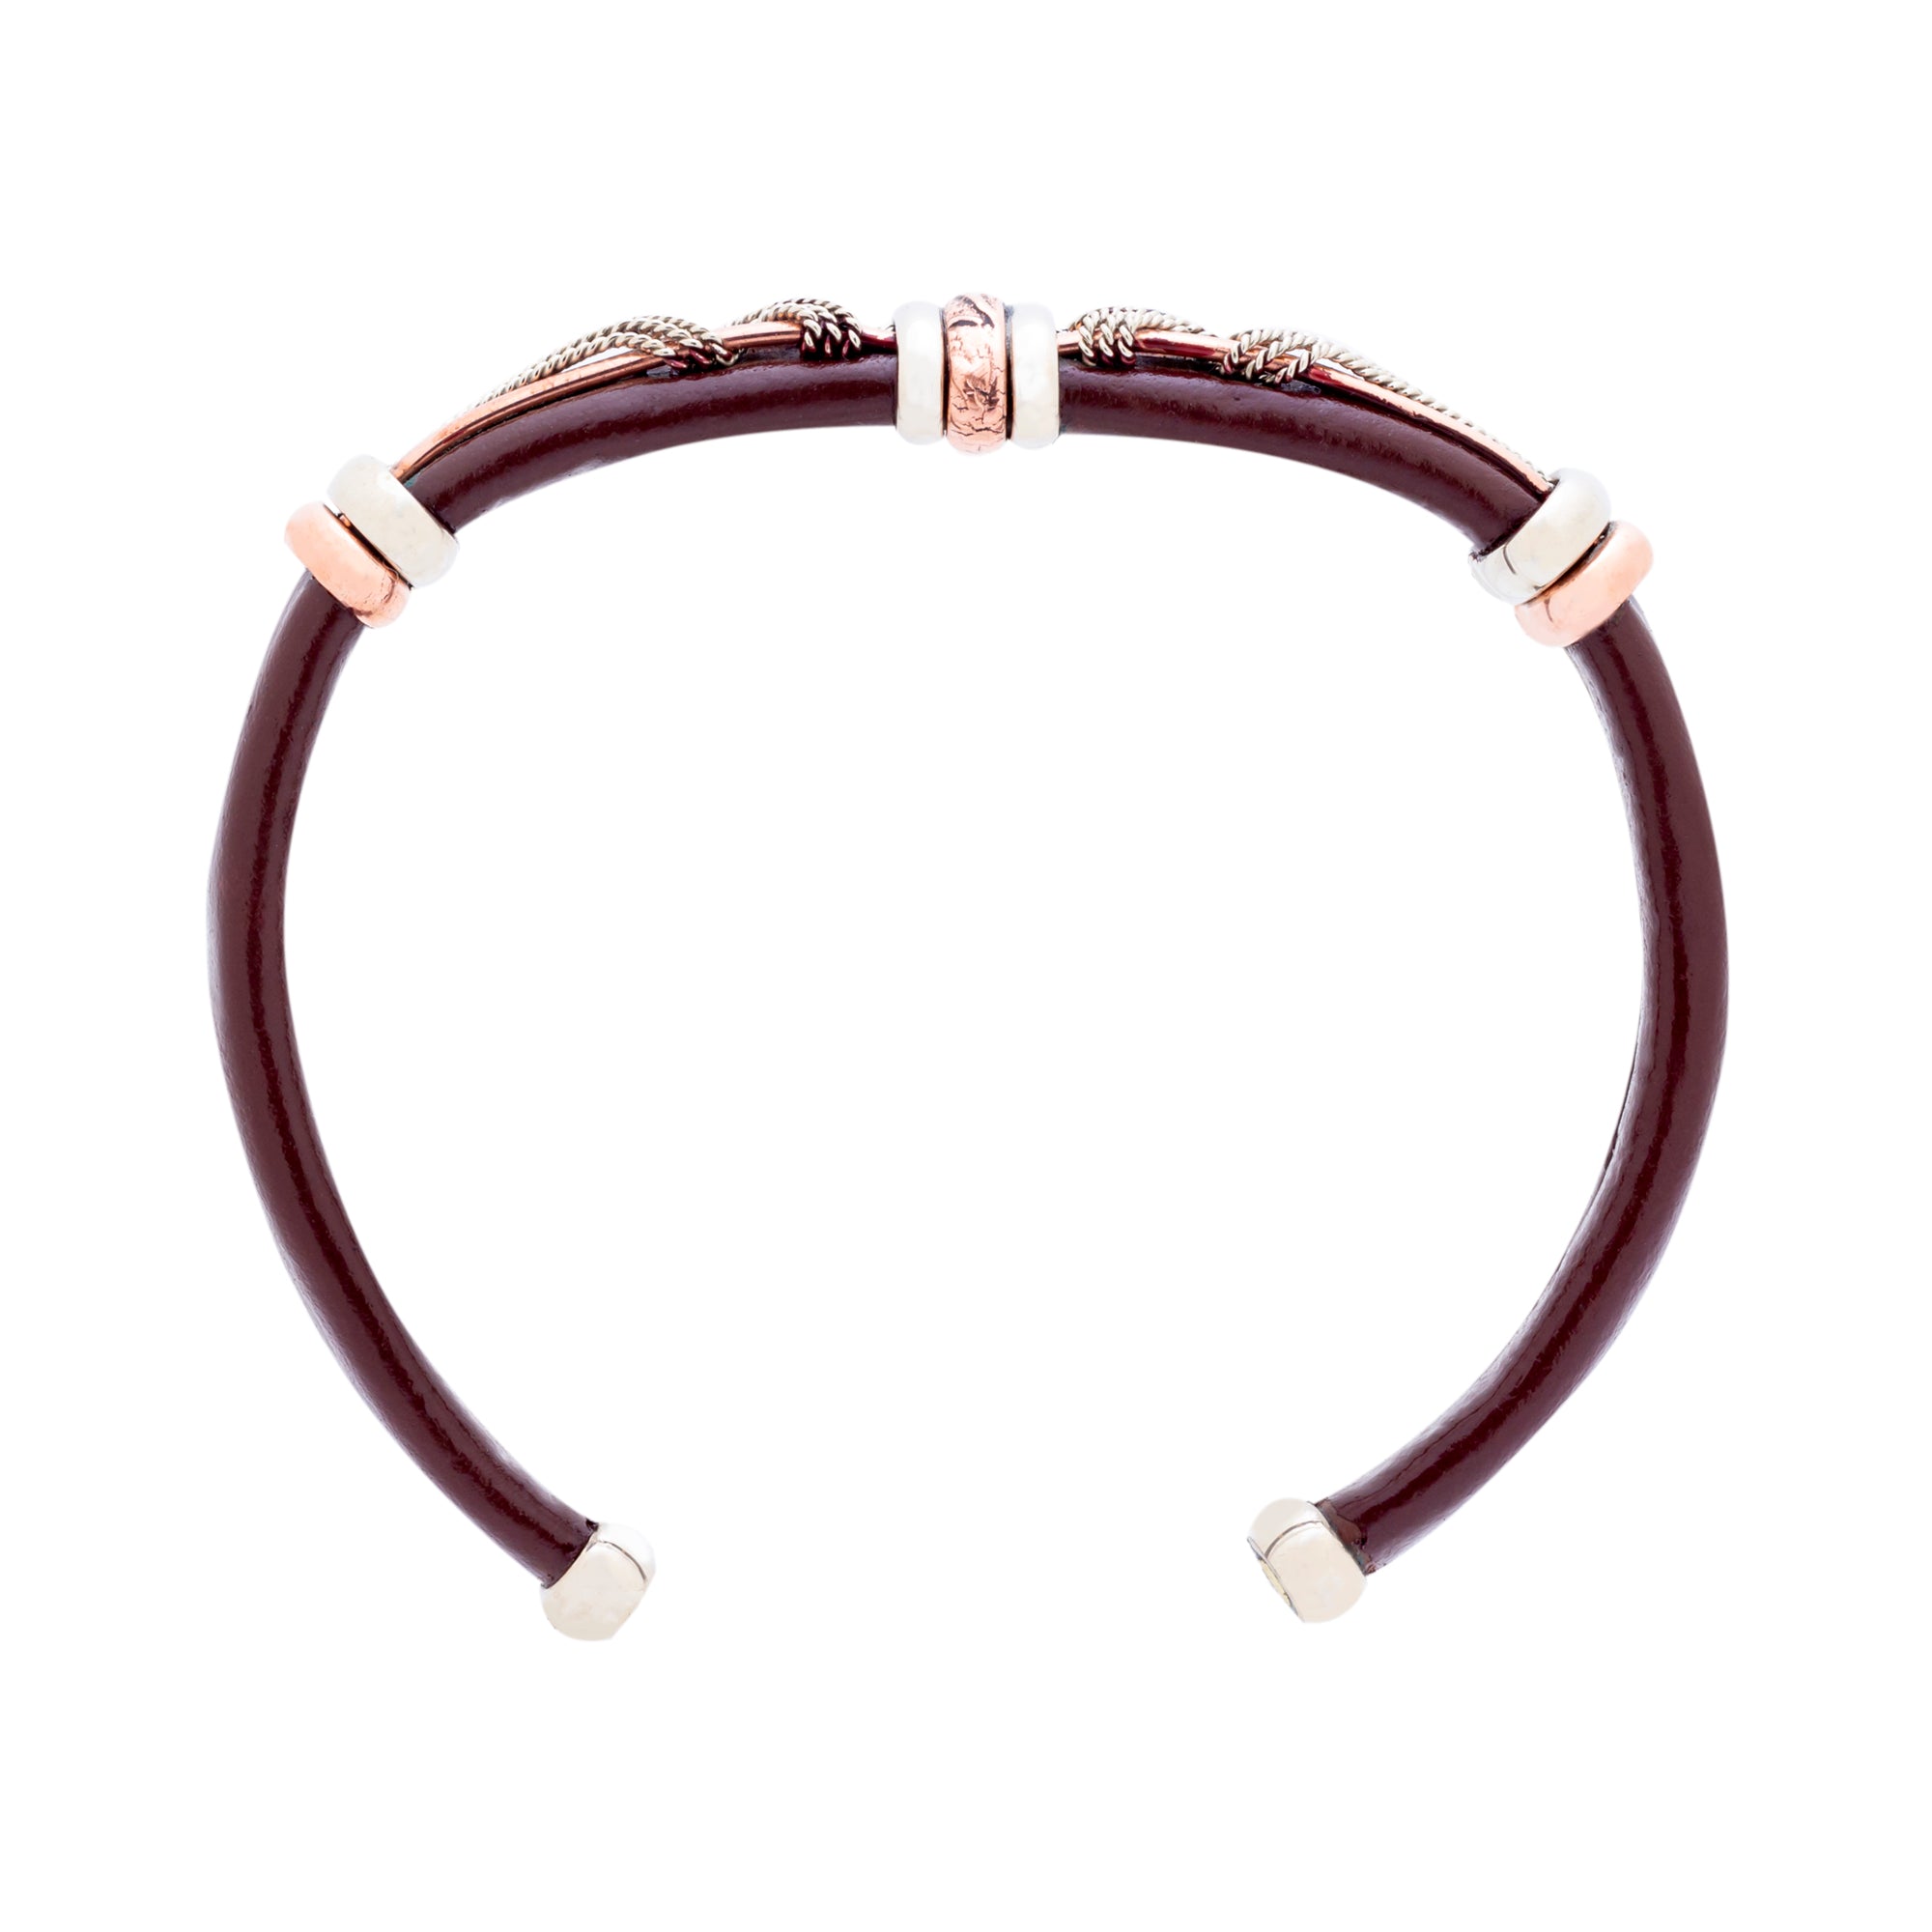 Leather Bracelet BR.ULB.0309 - Brown Leather Cuff Bracelet -Handcrafted by HPSilver, LLC.